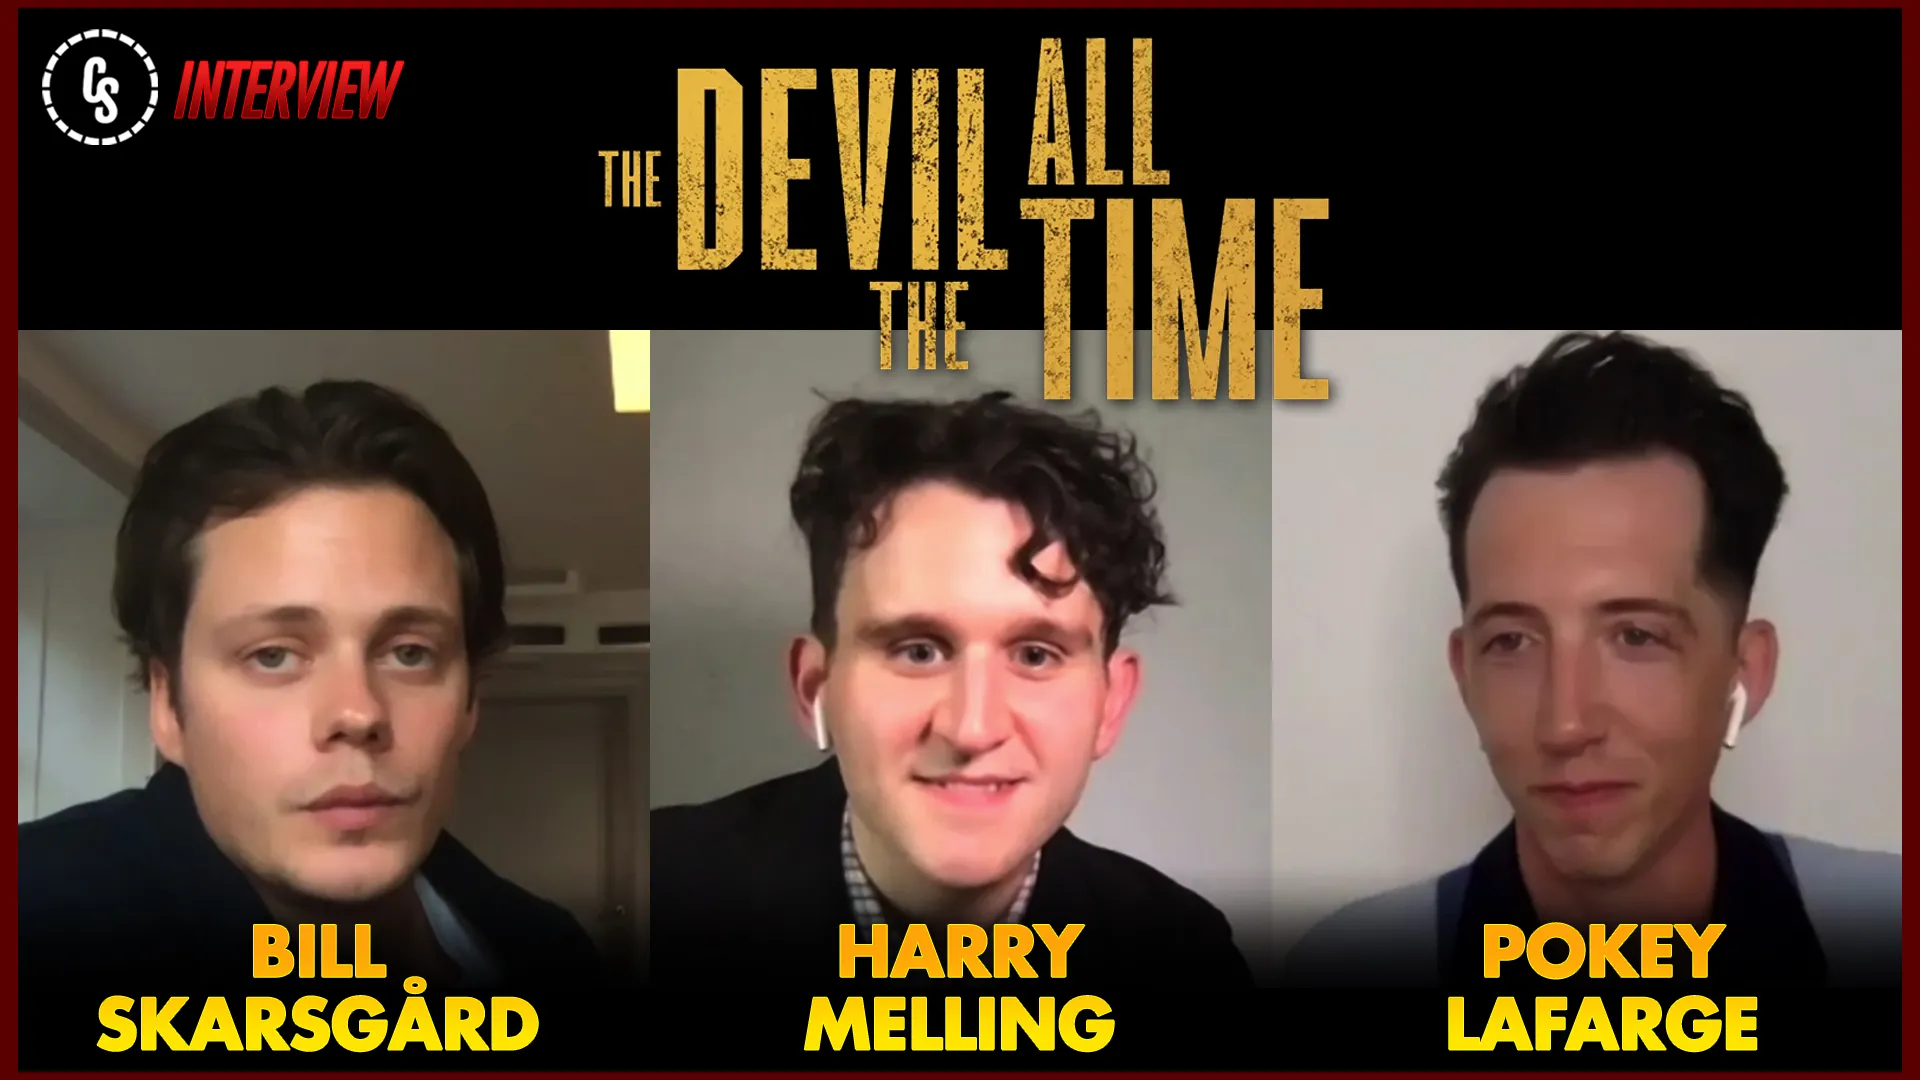 https://www.comingsoon.net/wp-content/uploads/sites/3/2020/09/The-Devil-All-The-Time-cast-thumb.jpg